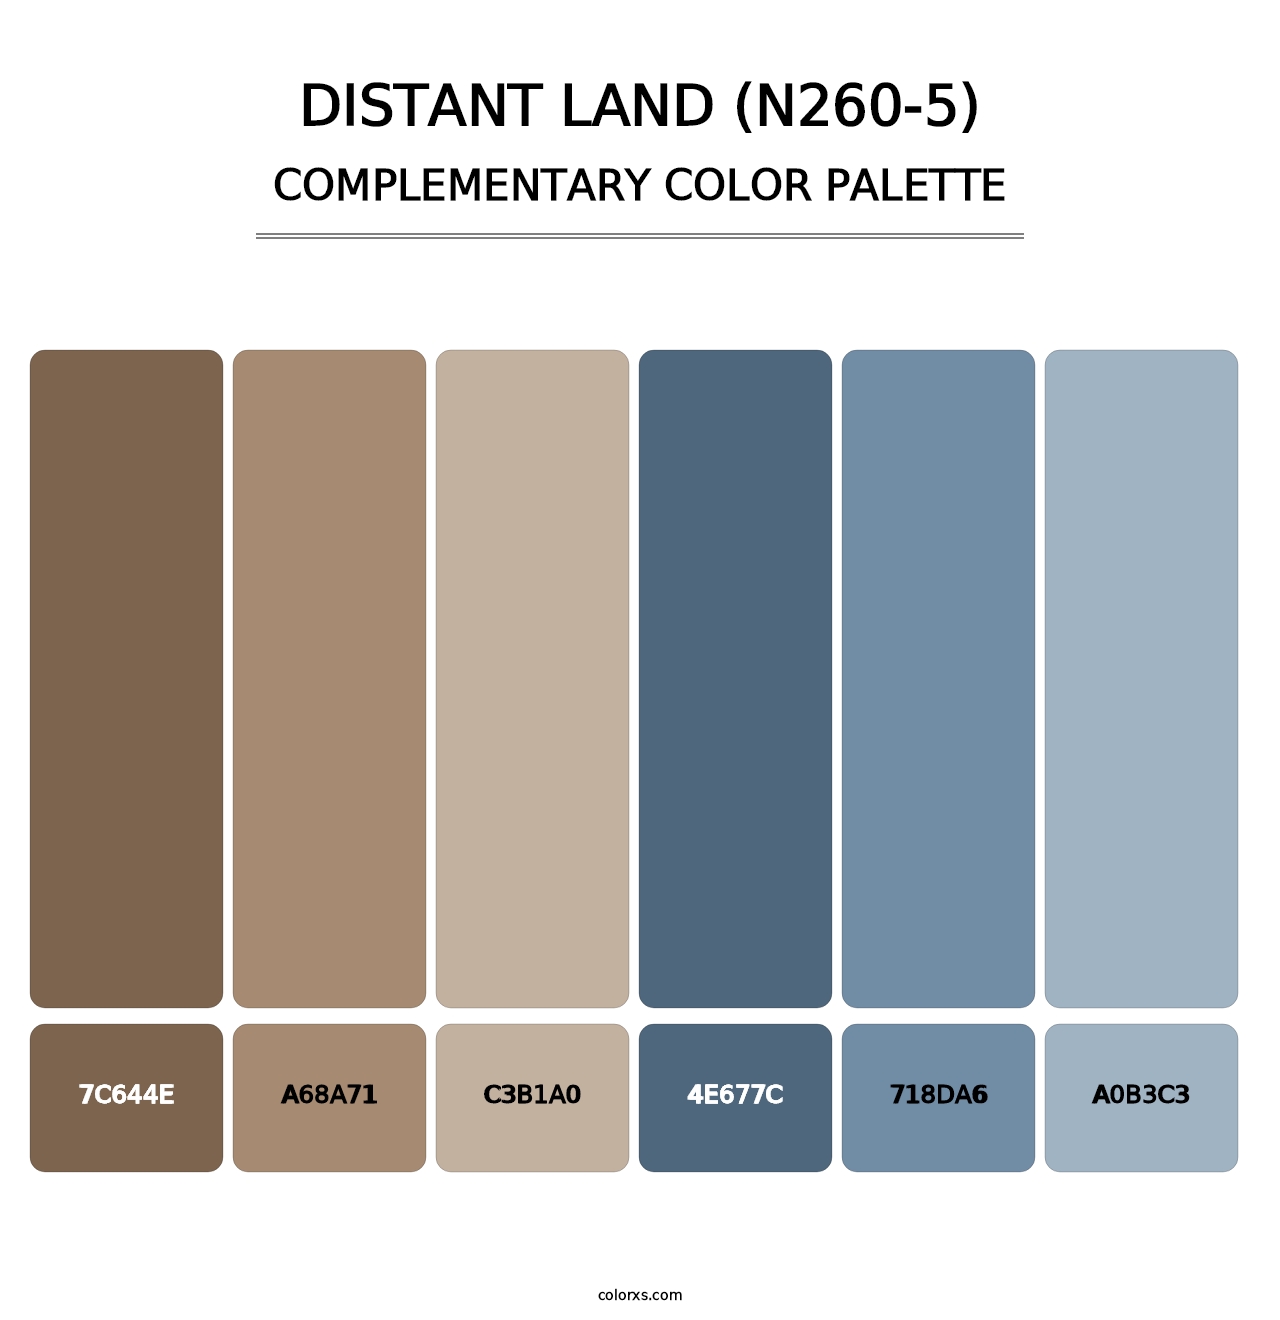 Distant Land (N260-5) - Complementary Color Palette